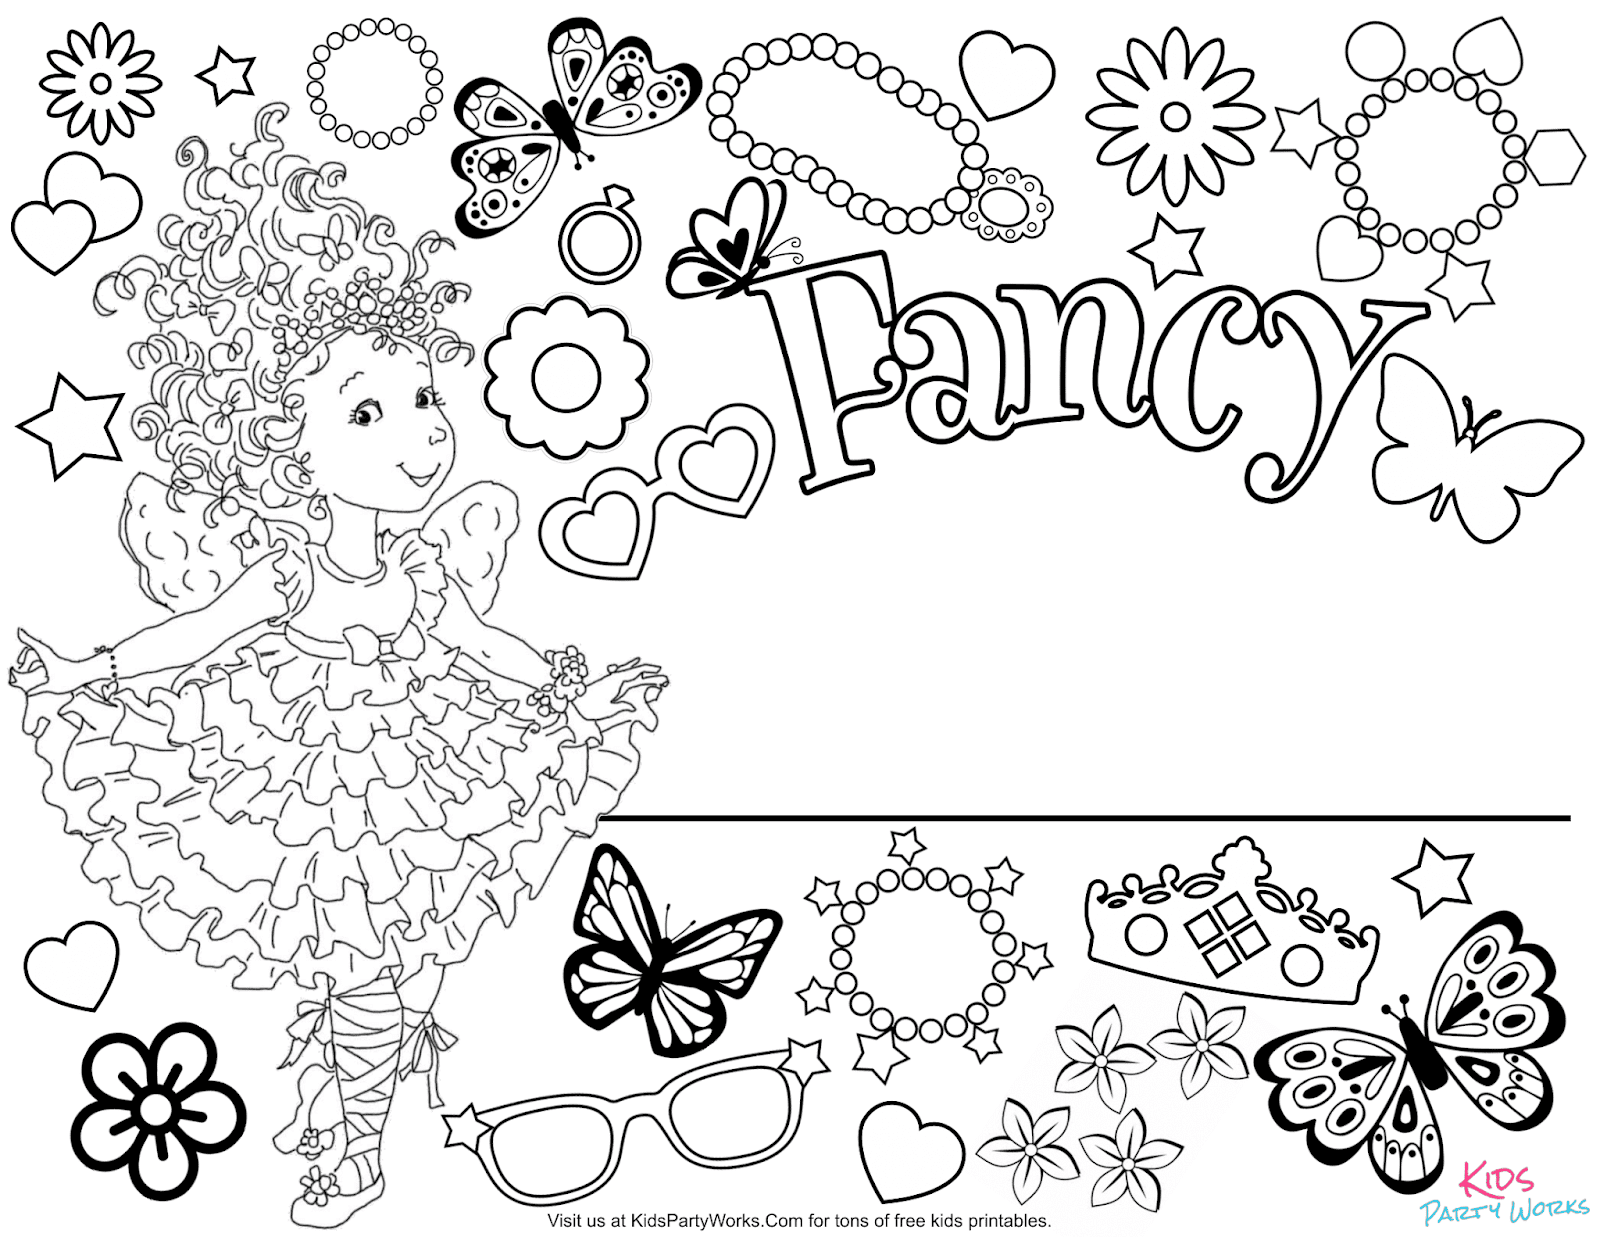 printable-fancy-nancy-show-bree-coloring-pages-donnaecford